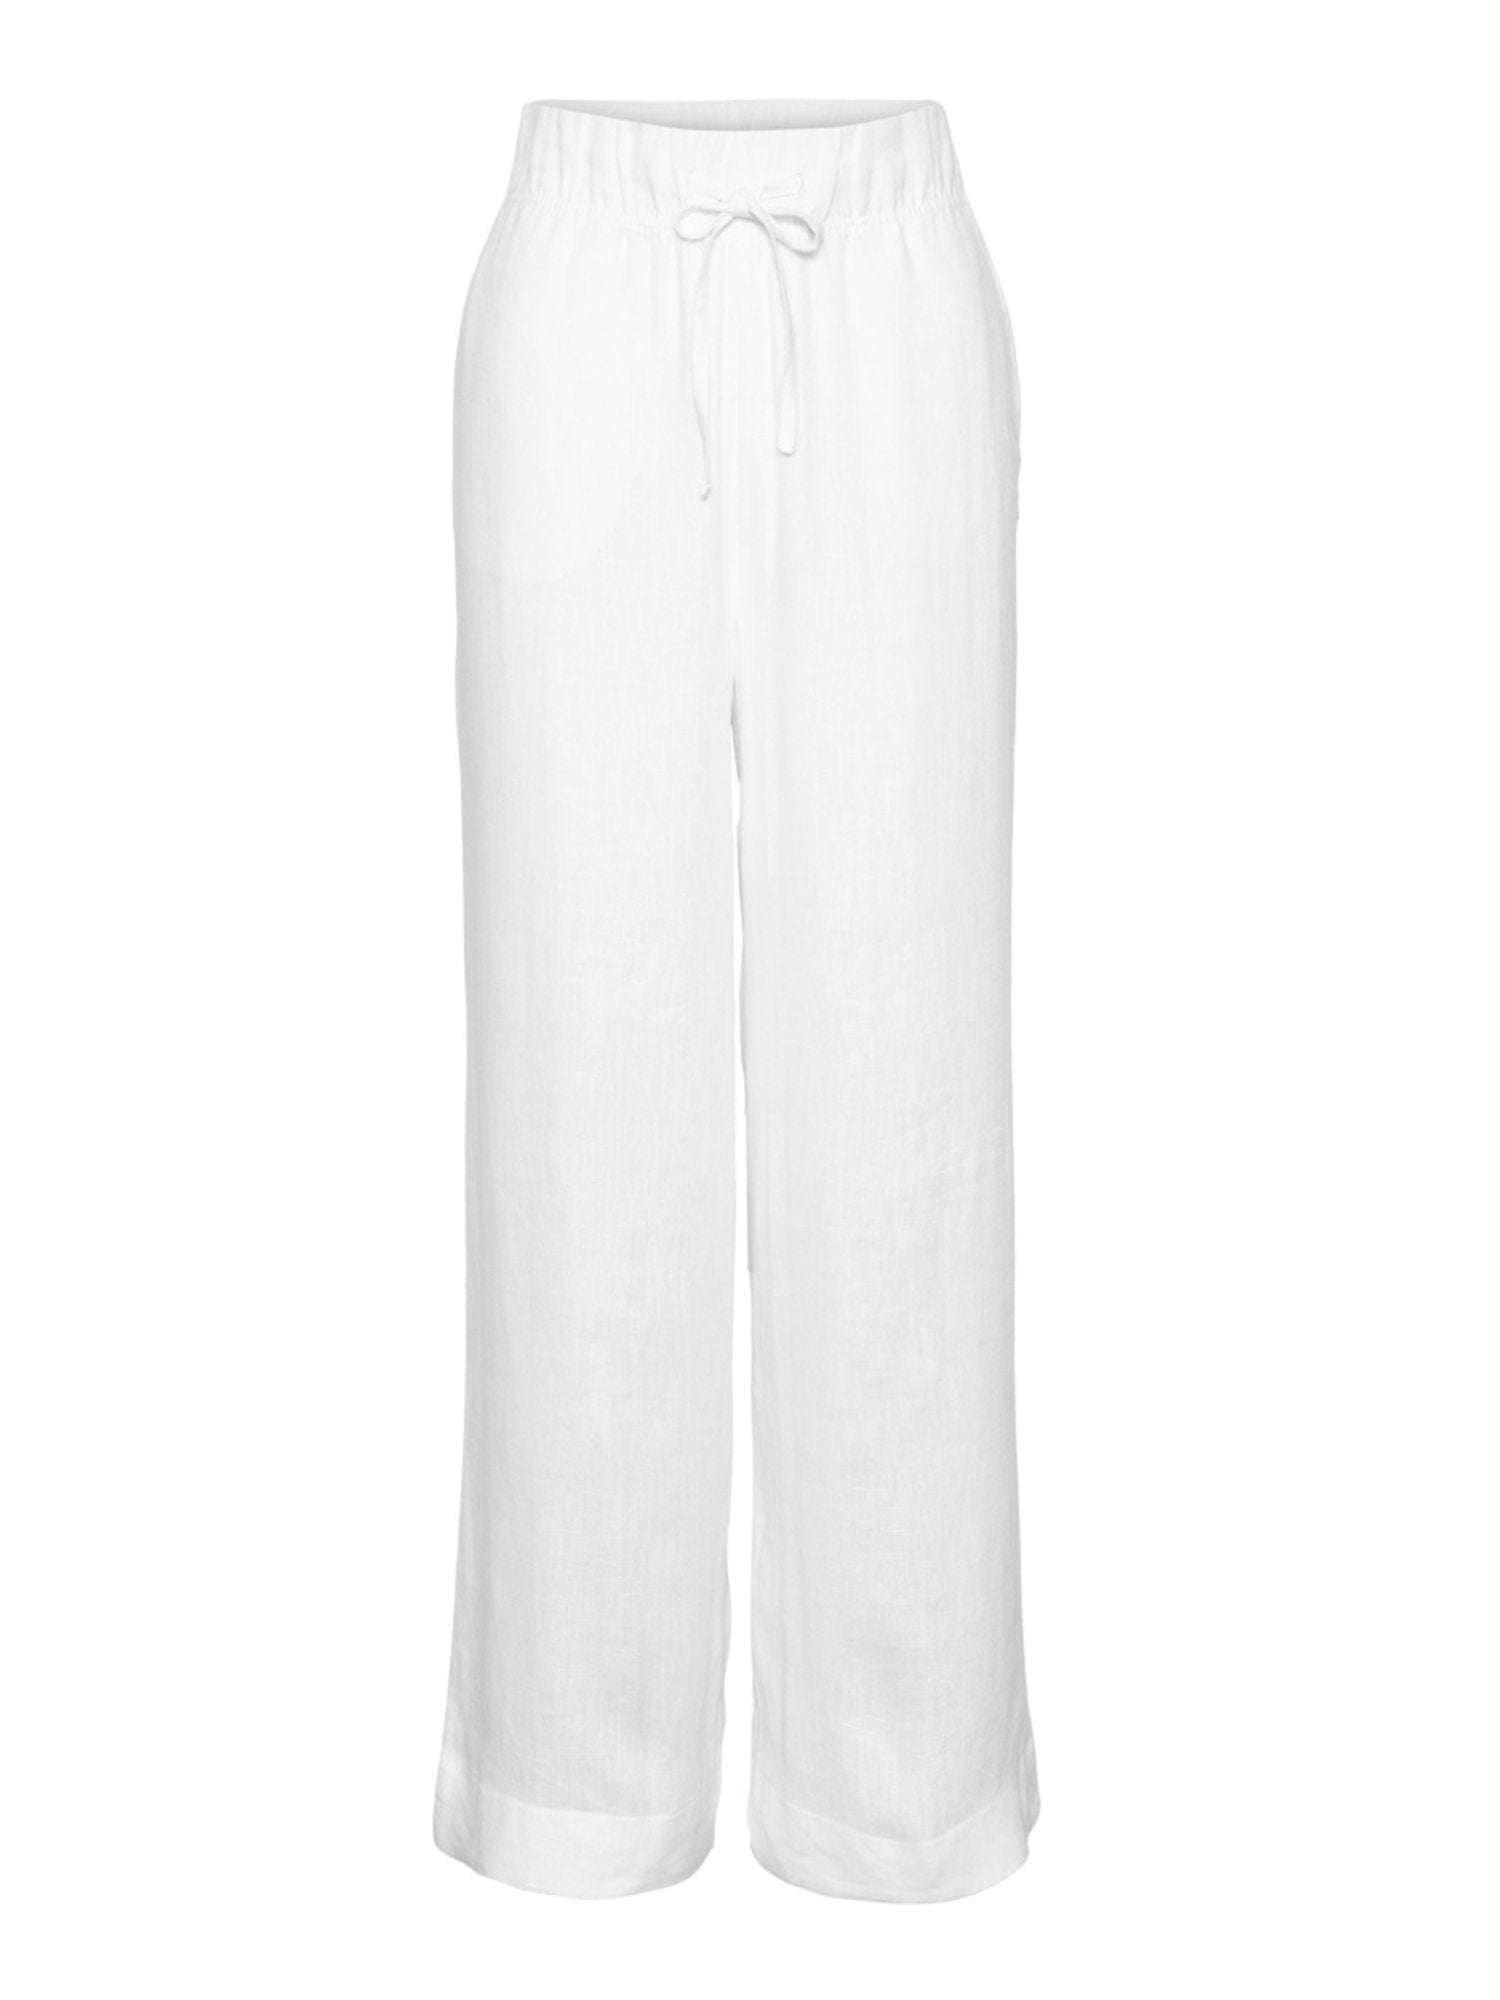 Immi Linen Pants - White - at home